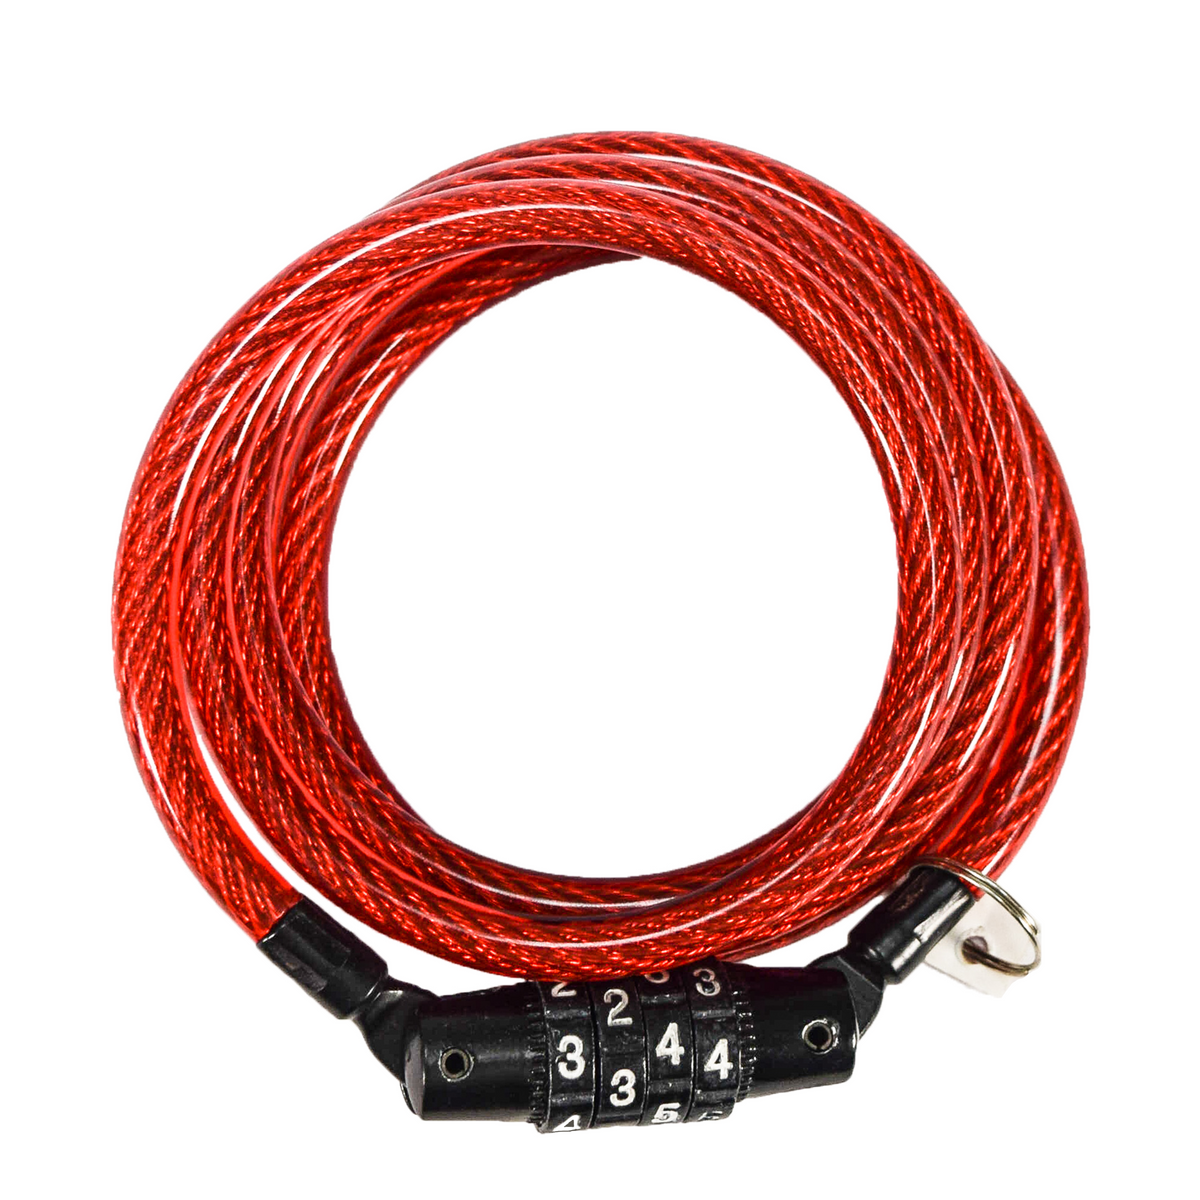 Kryptonite 4' Keeper 712 Combo Cable Red 004929 Four Foot Cable Length